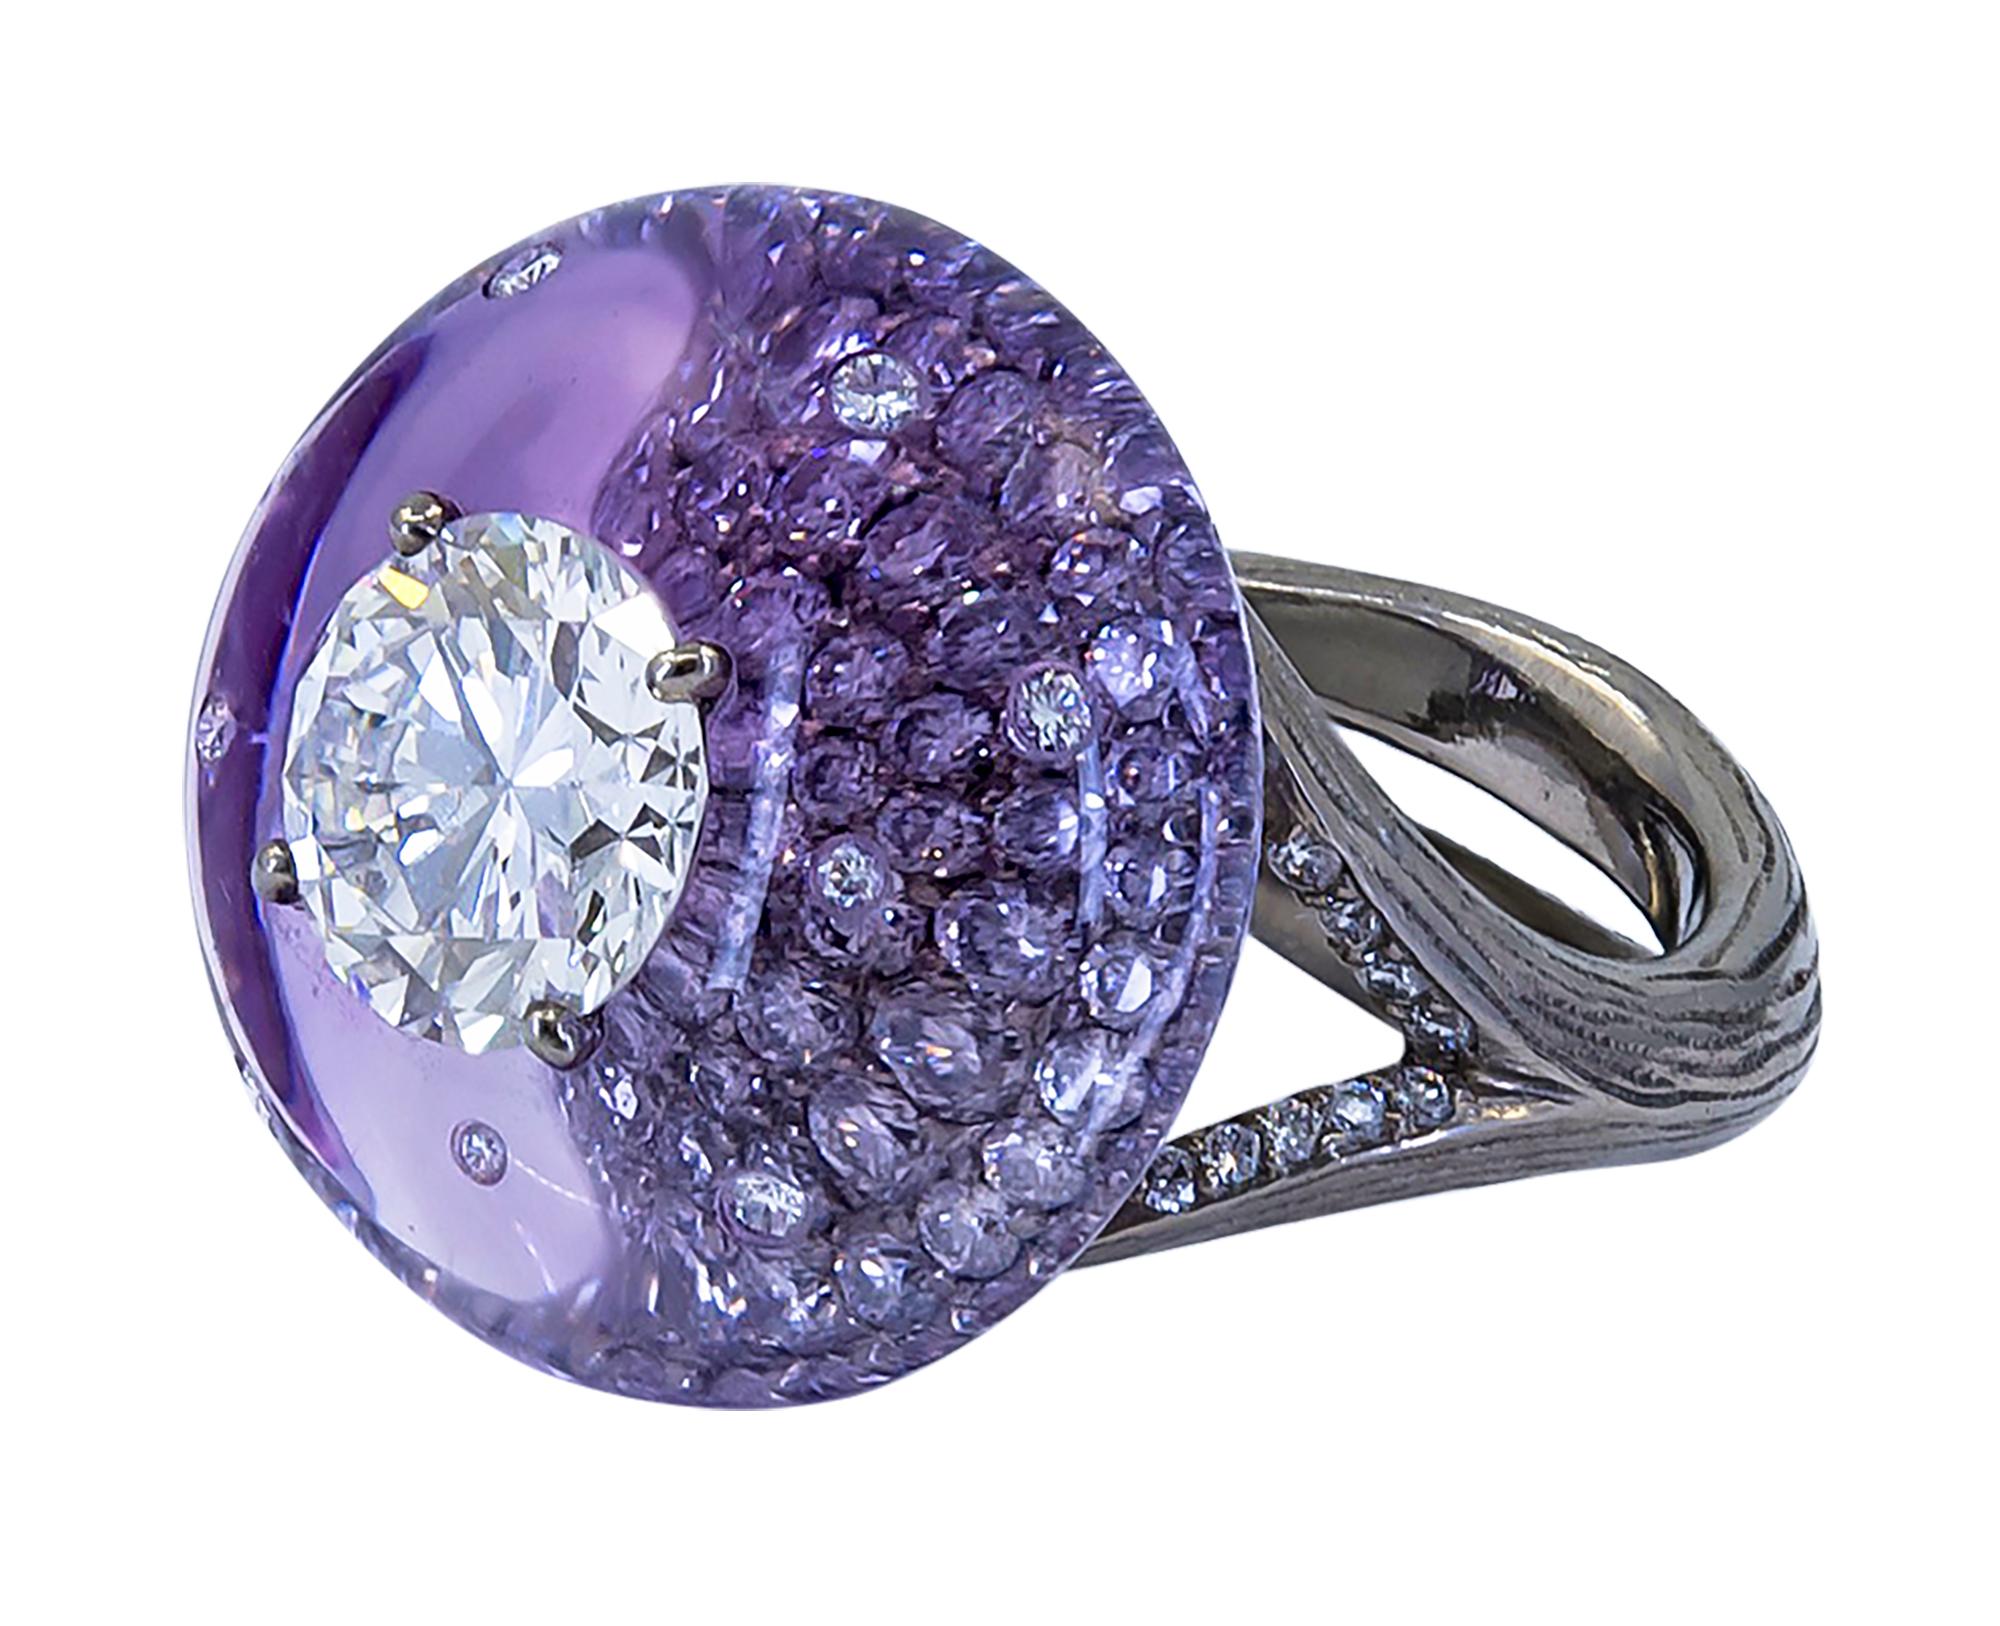 Contemporary Wallace Chan Cabochon Amethyst Diamond Titanium Ring and Earrings Set